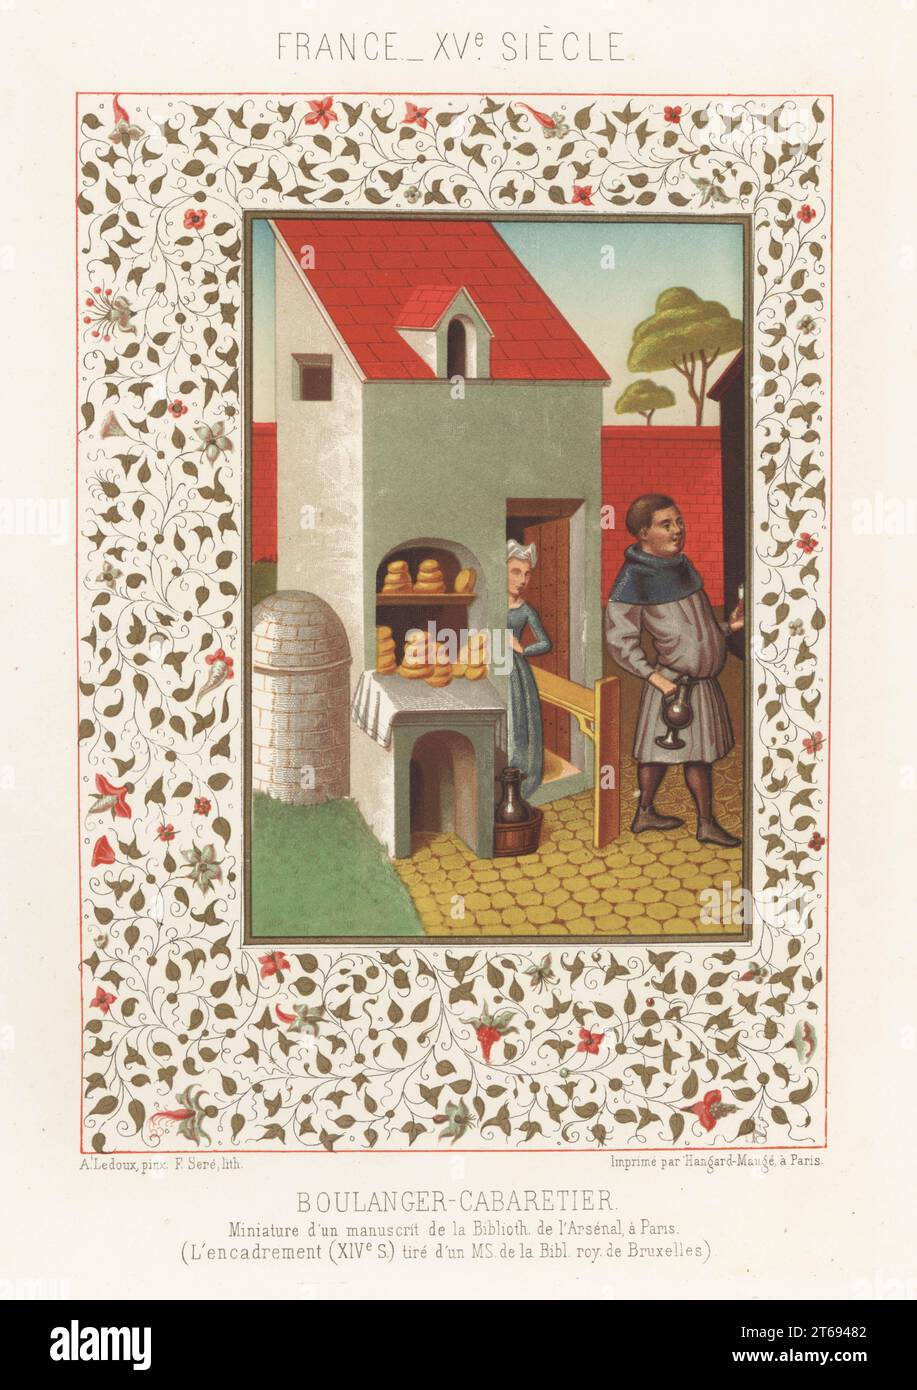 Florentine innkeeper Gerin, famed for his selection of wines, at his bakery-bar or Boulanger-Cabaretier, France, XVe siecle. Miniature from a MS of Giovanni Boccaccio's De Mulieribus Claris in the Bibliotheque de l'Arsenal. Decorative floral frame (14thC) from a MS in the Bibliotheque royale de Bruxelles. Chromolithograph by Ferdinand Sere after an illustration by A. Ledoux from Charles Louandres Les Arts Somptuaires, The Sumptuary Arts, Hangard-Mauge, Paris, 1858. Stock Photo